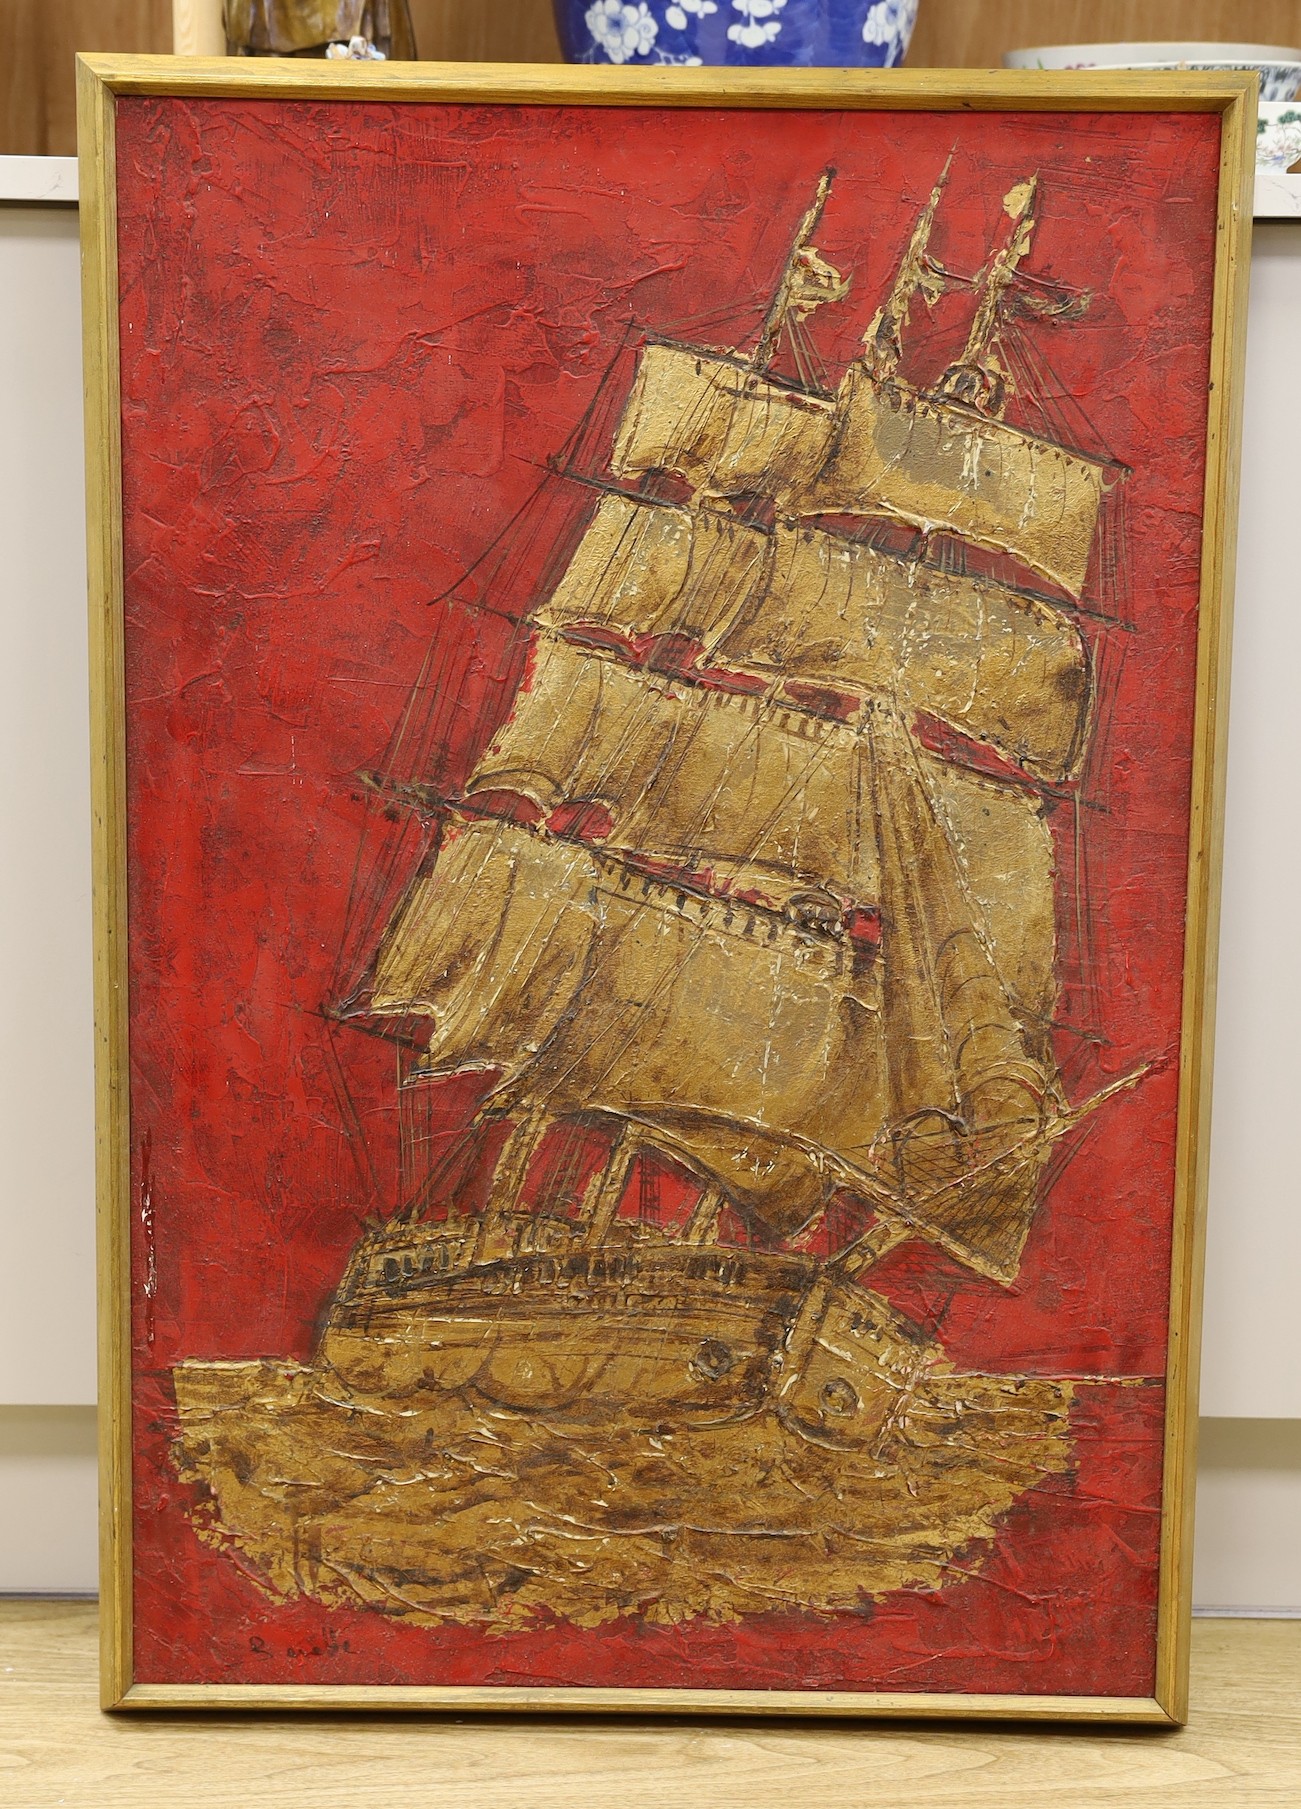 Berette (Unicorn Gallery), oil on canvas heightened with gold, Galleon at sea, signed, 90 x 60cm